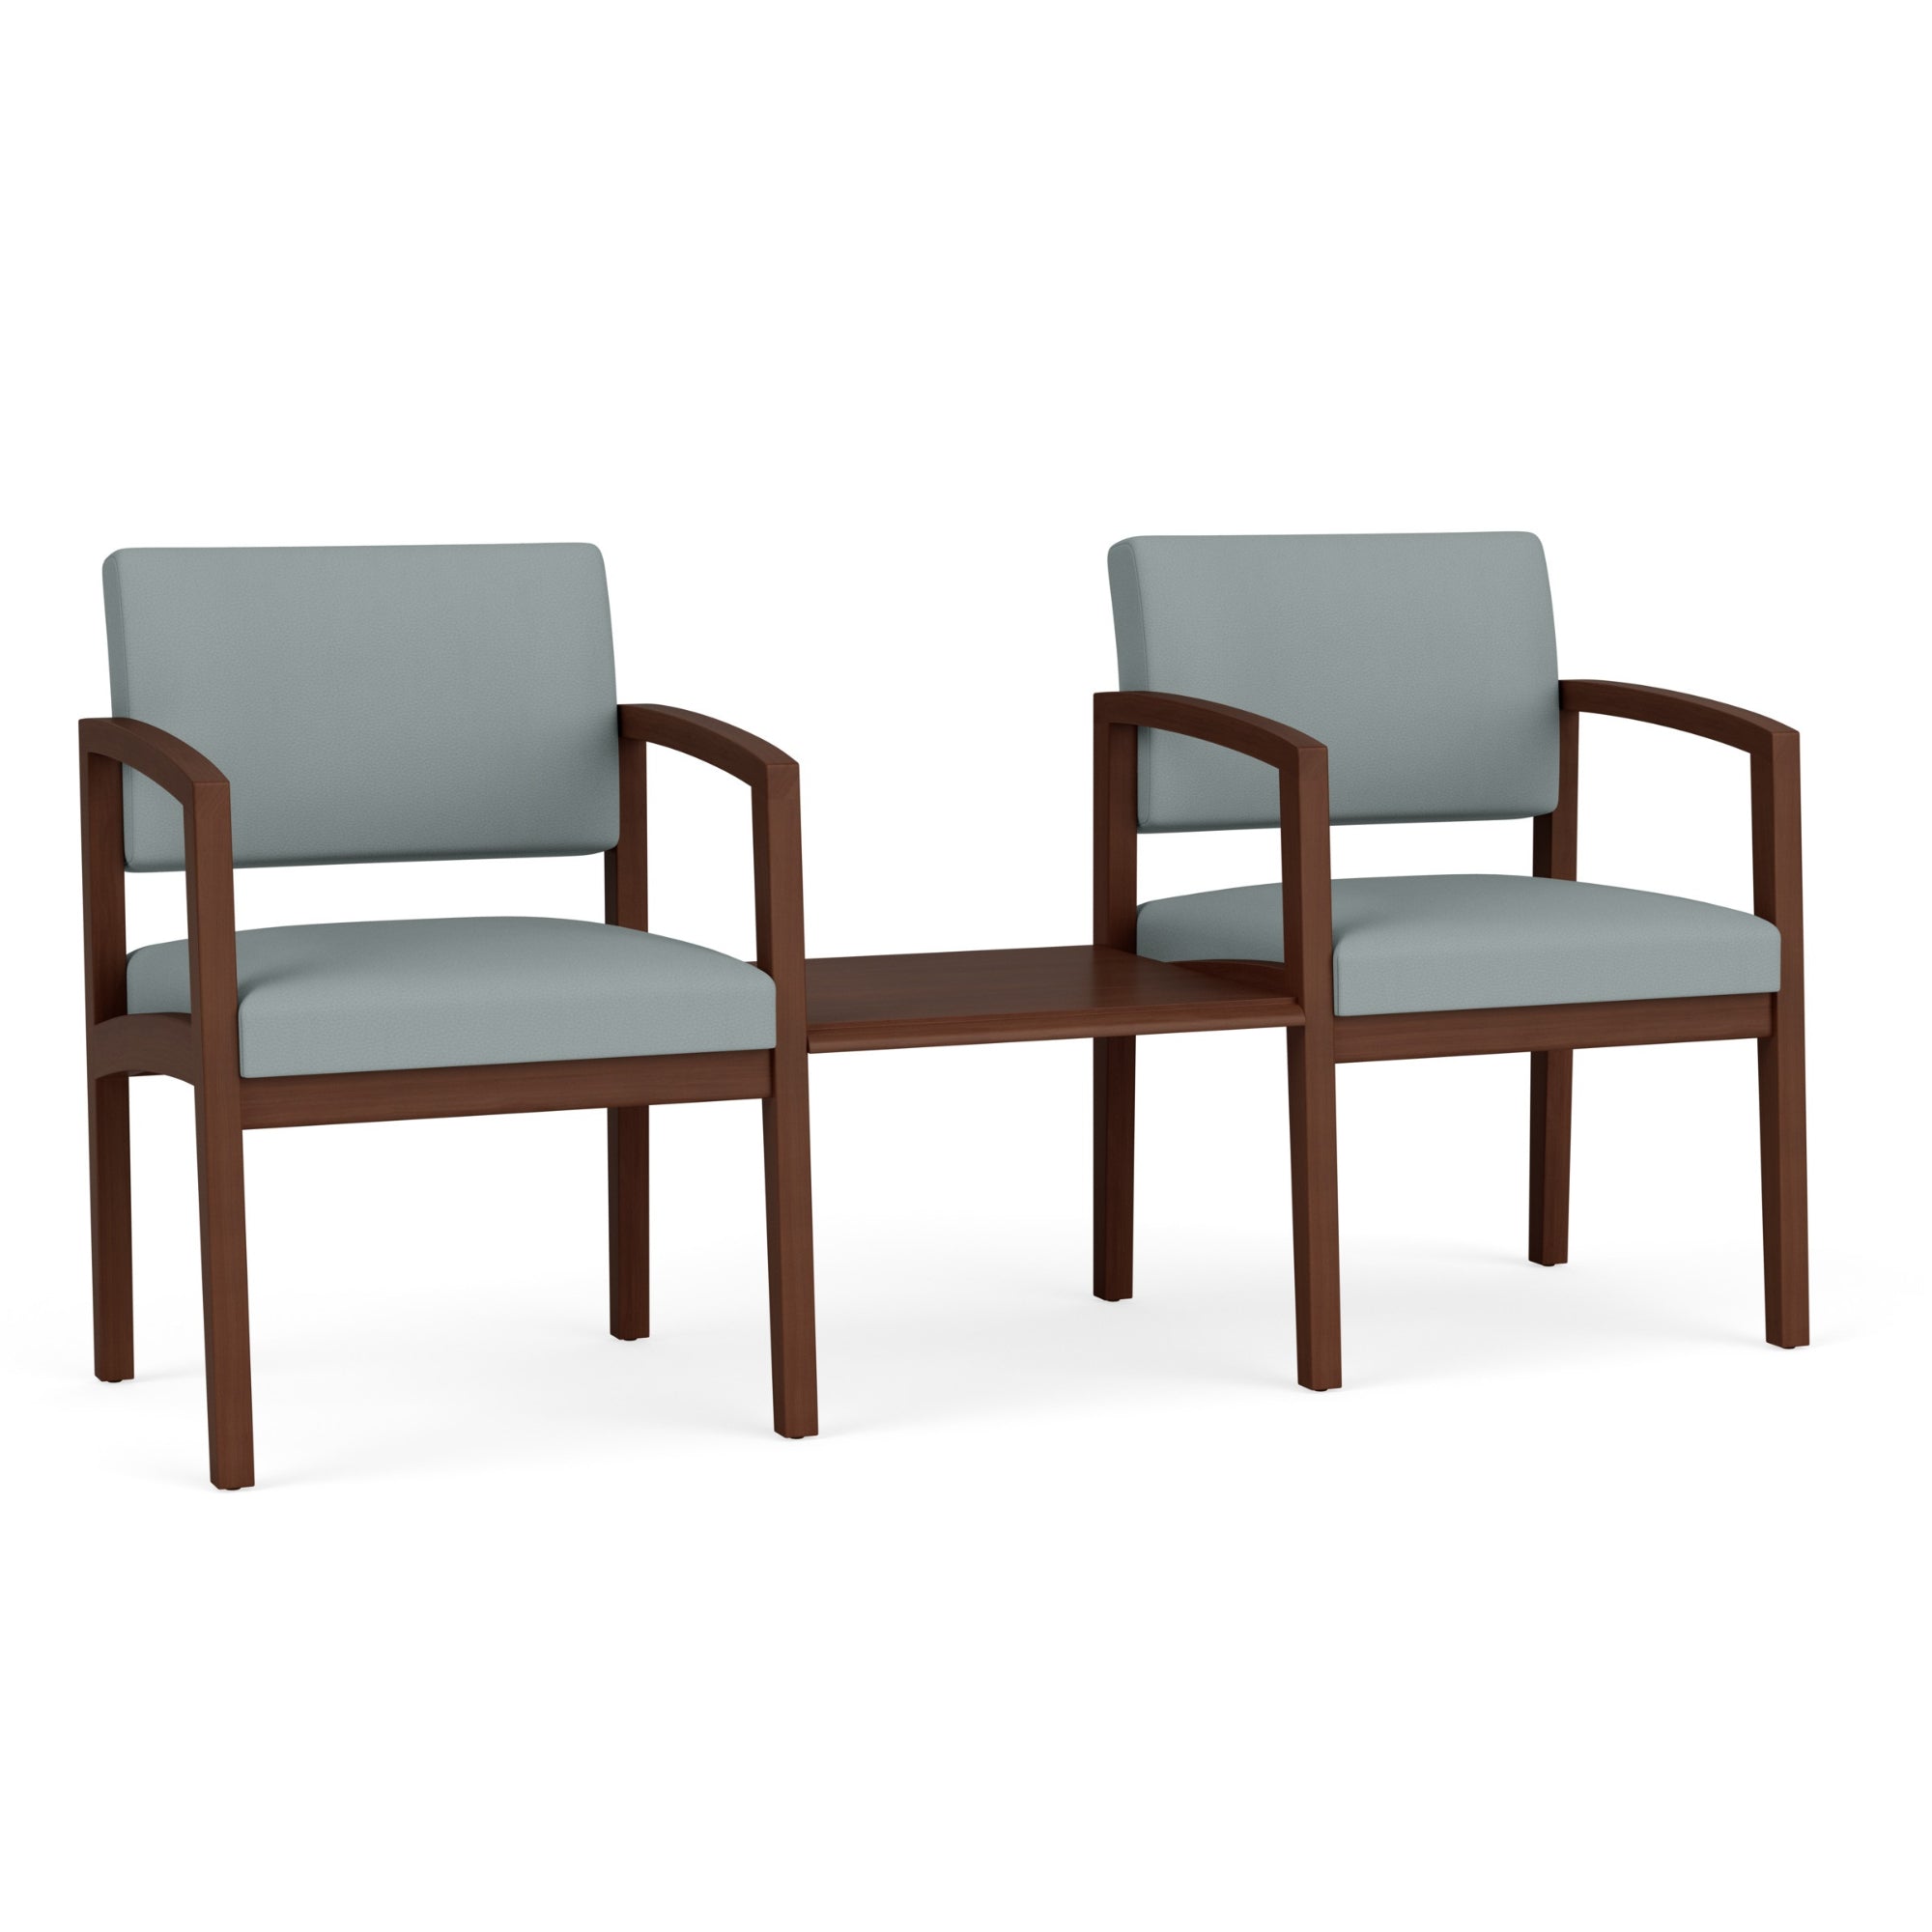 Lenox Wood Collection Reception Seating, 2 Chairs with Solid Wood Connecting Center Table, Standard Fabric Upholstery, FREE SHIPPING